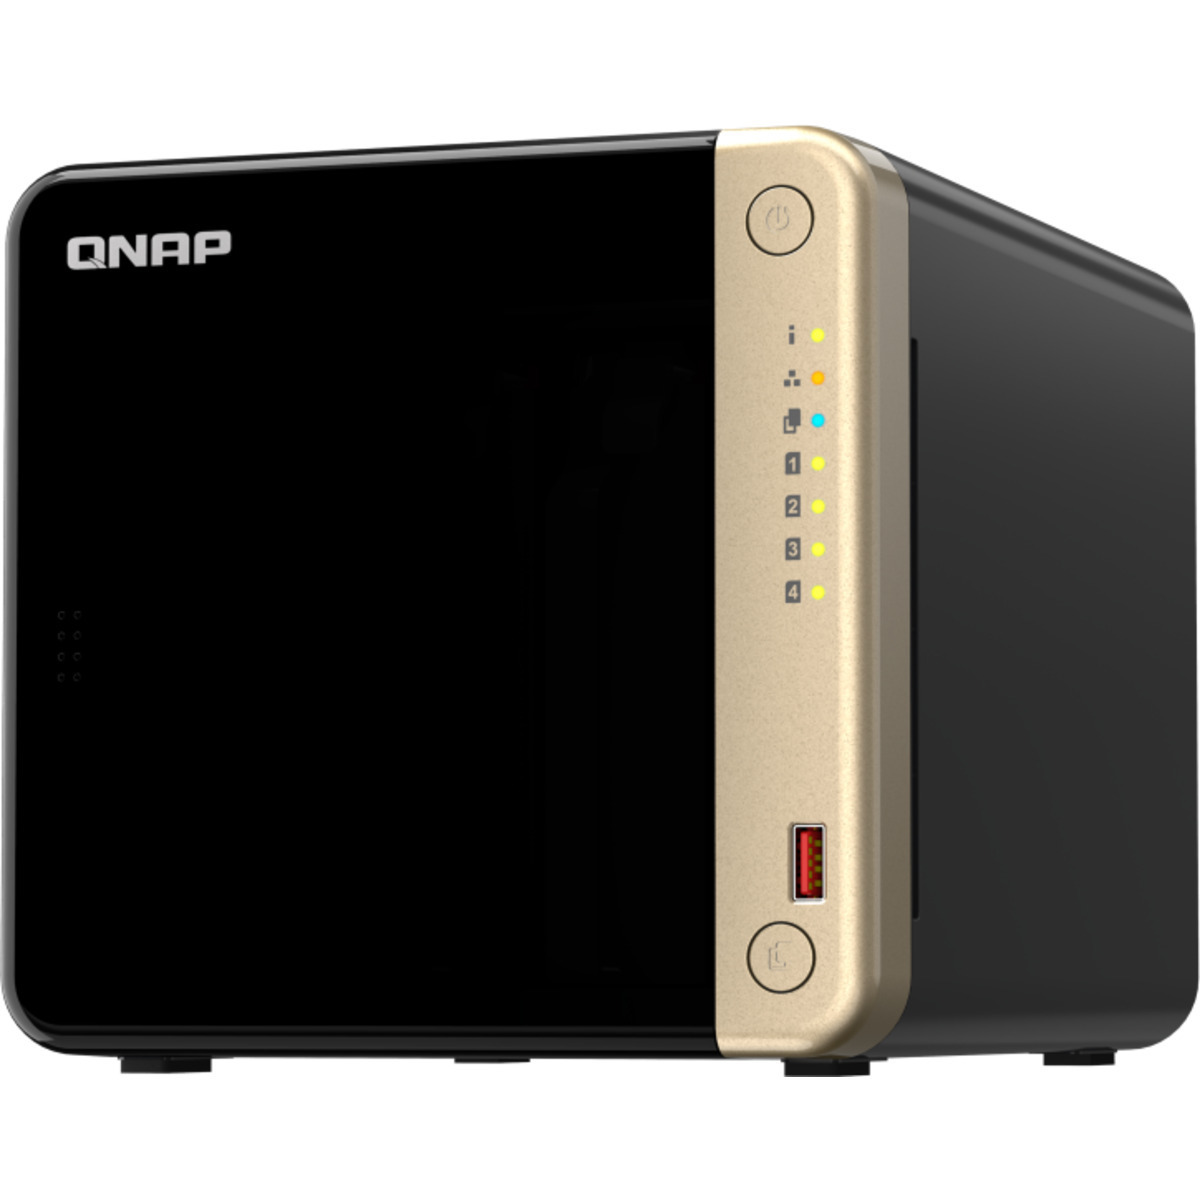 QNAP TS-464 32tb 4-Bay Desktop Multimedia / Power User / Business NAS - Network Attached Storage Device 4x8tb Seagate IronWolf ST8000VN004 3.5 7200rpm SATA 6Gb/s HDD NAS Class Drives Installed - Burn-In Tested TS-464